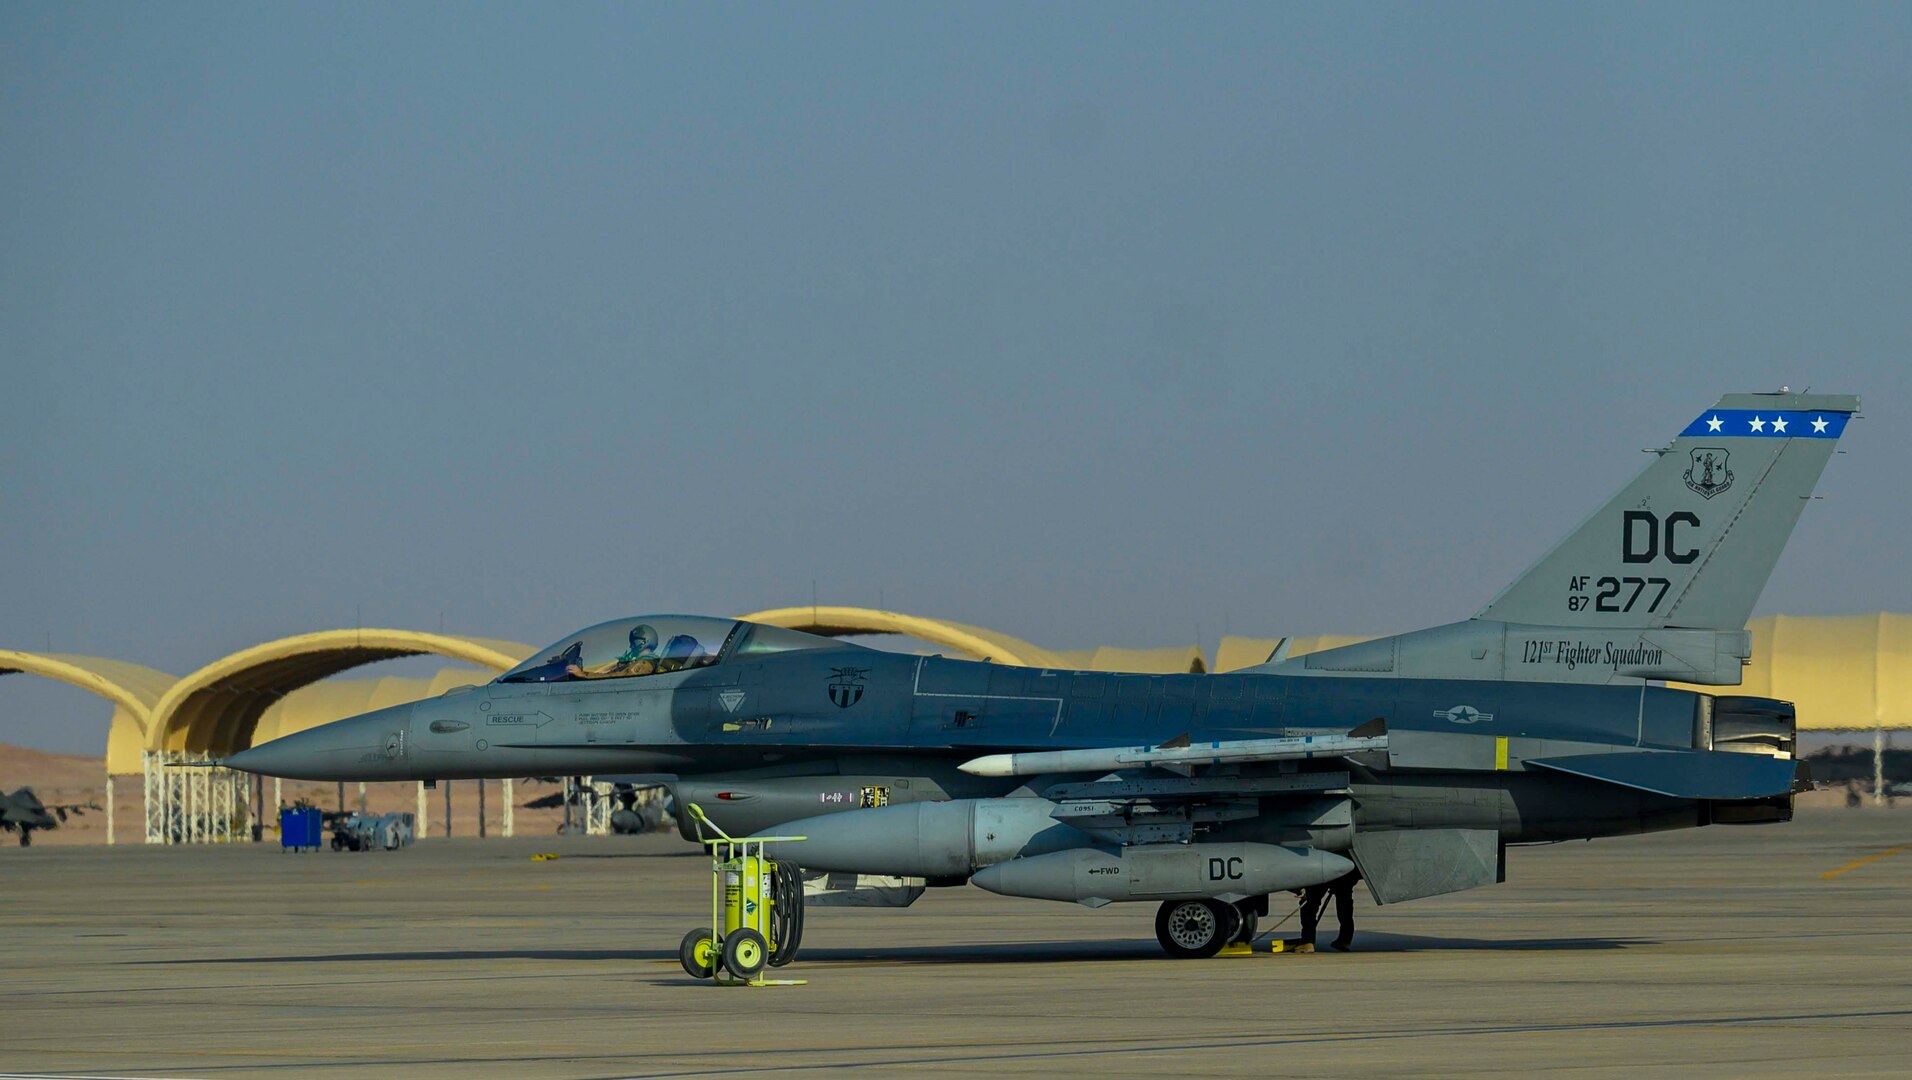 A U.S. Air Force F-16C Fighting Falcon from District of Columbia Air National Guard’s 113th Wing, known as the “Capital Guardians,” sits on the flight line at Prince Sultan Air Base, Kingdom of Saudi Arabia, July 9, 2021. The wing deployed a contingent of F-16s to PSAB to reinforce the base’s defensive capabilities, provide operational depth, and support U.S. Central Command operations in the region. (U.S. Air Force Photo by Senior Airman Samuel Earick)